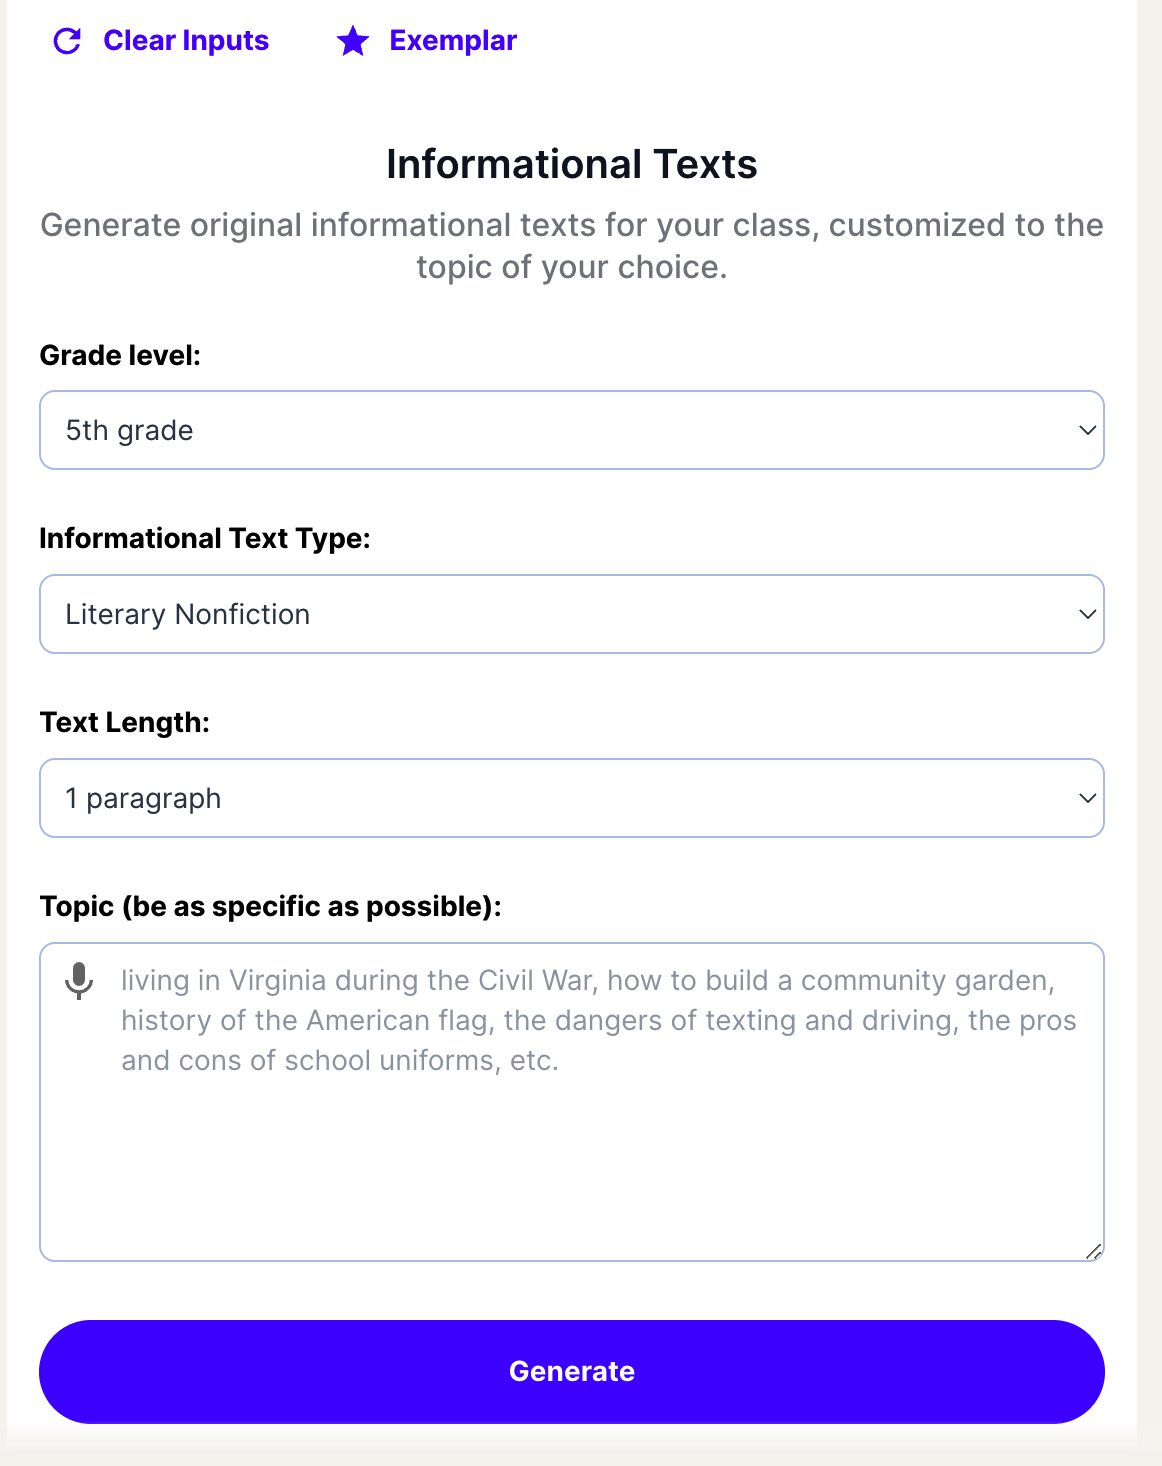 MagicSchool AI's Informational Texts Generator offers literacy teachers a quick way to accommodate learners' needs when it comes to reading.